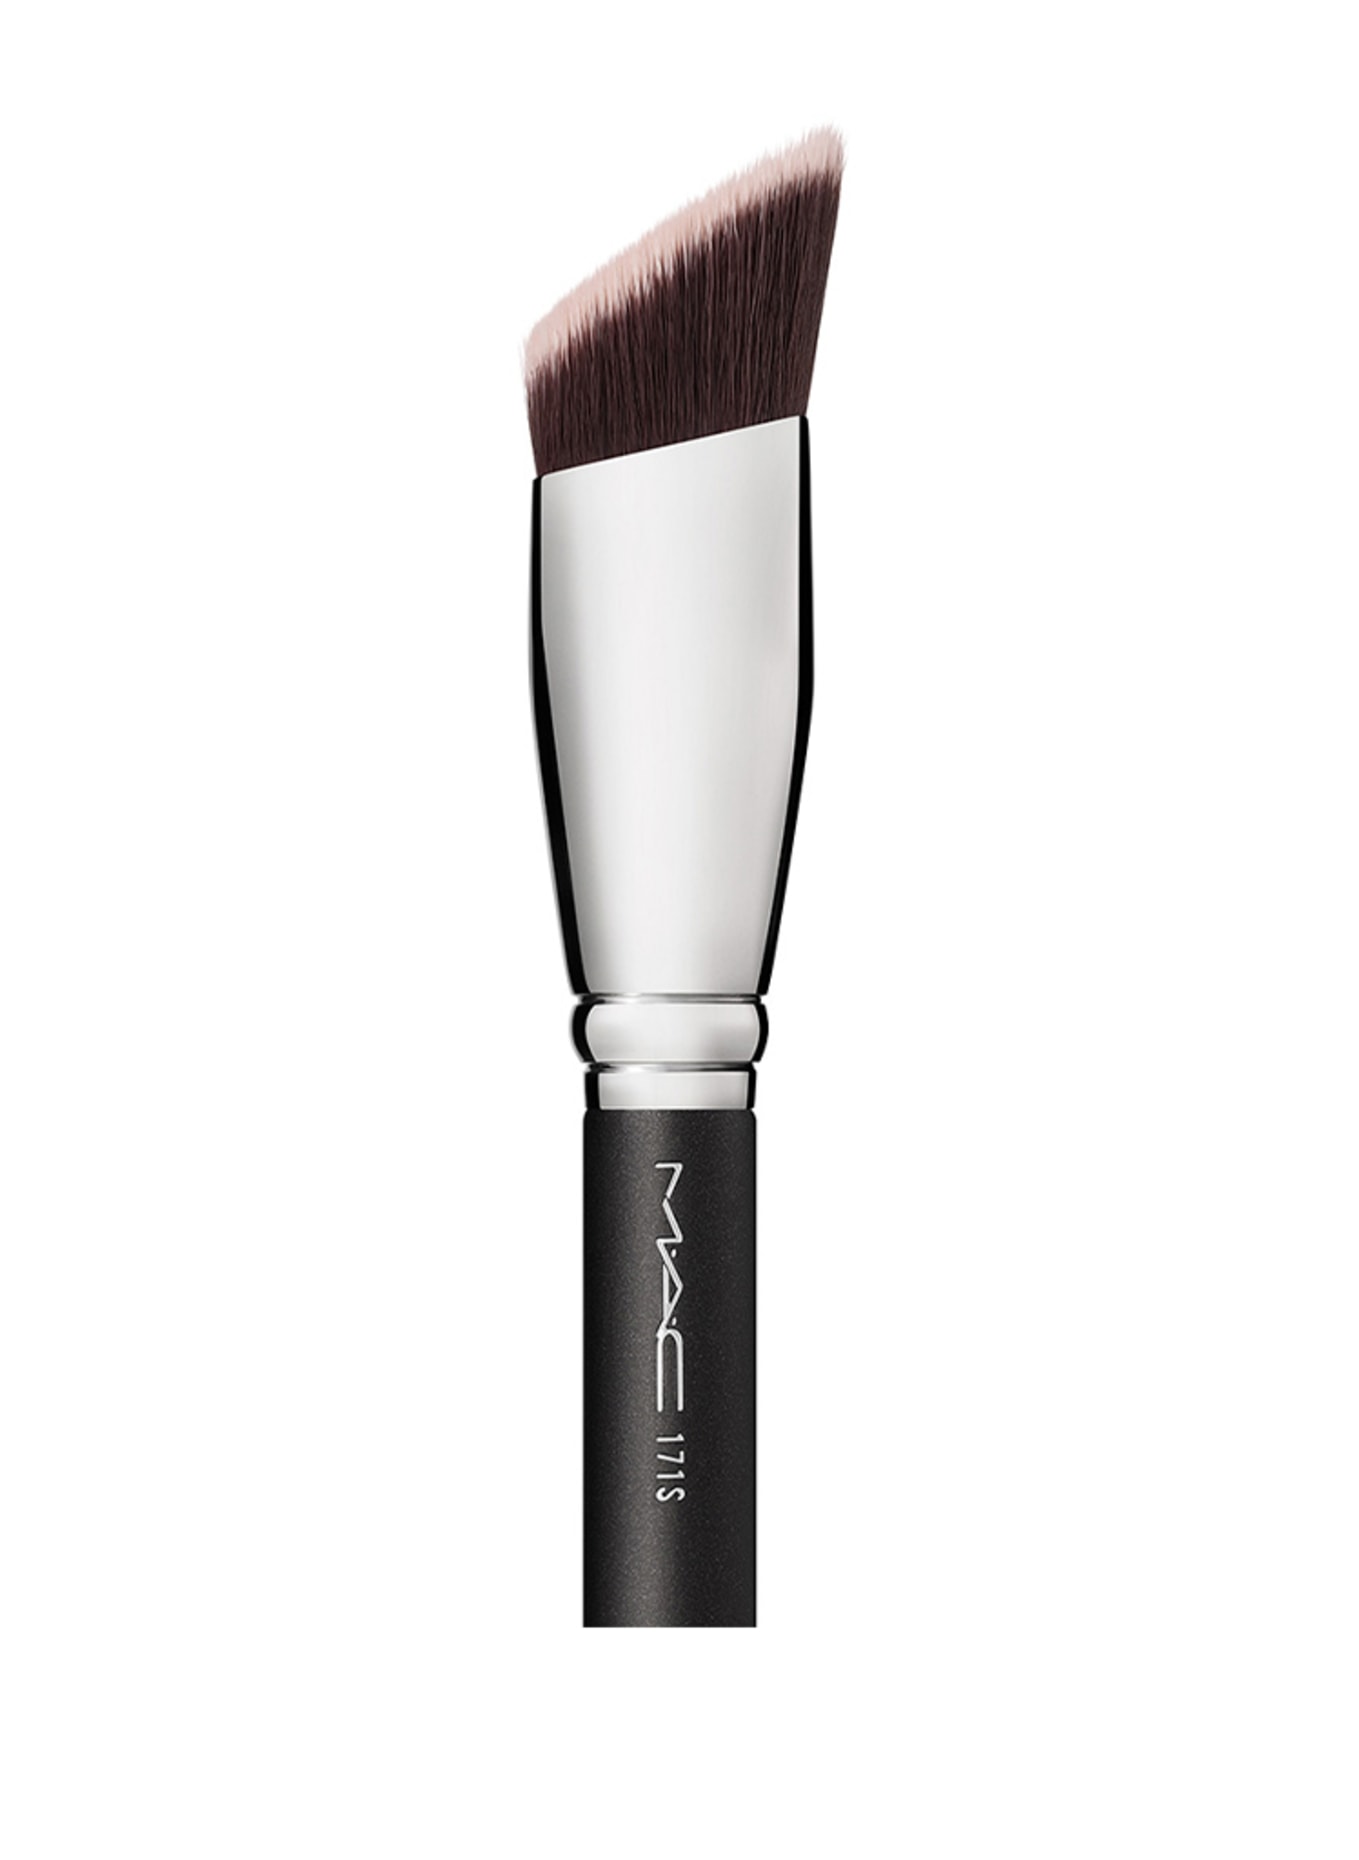 M.A.C SMOOTHE EDGE ALL OVER FACE BRUSH (Obrazek 2)